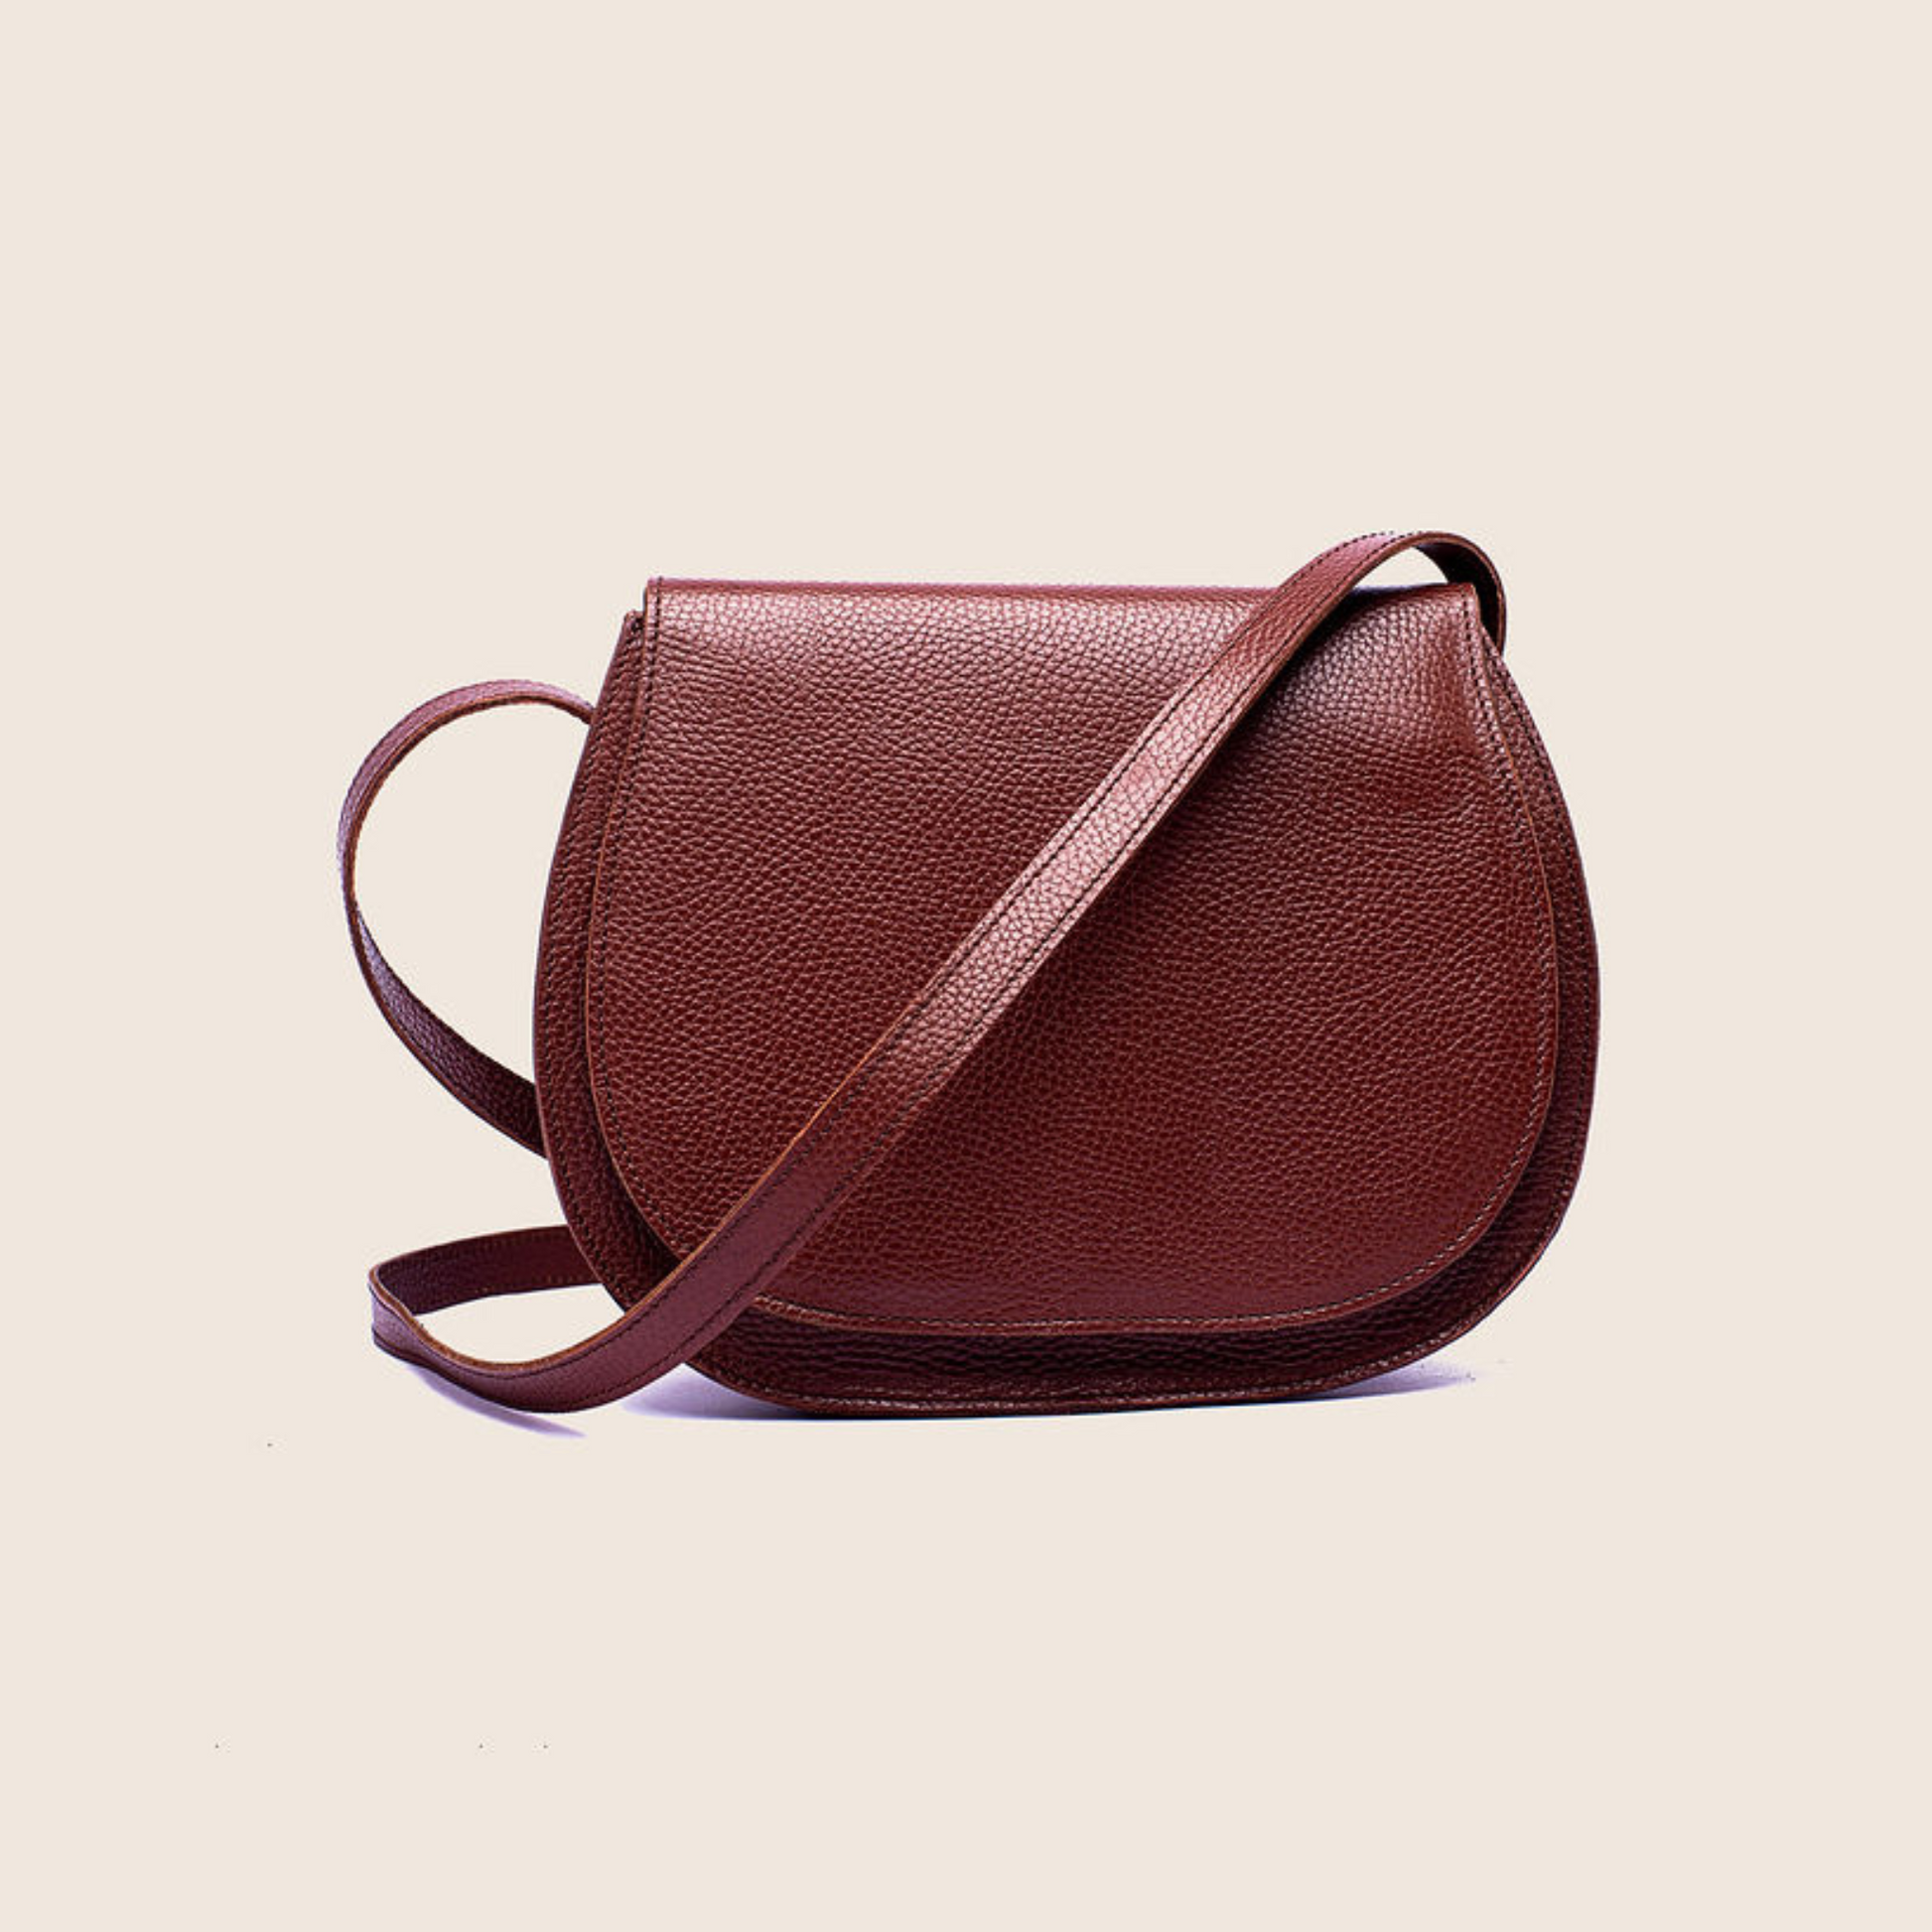 Saddle crossbody in Firebrick milled leather with a crossbody strap